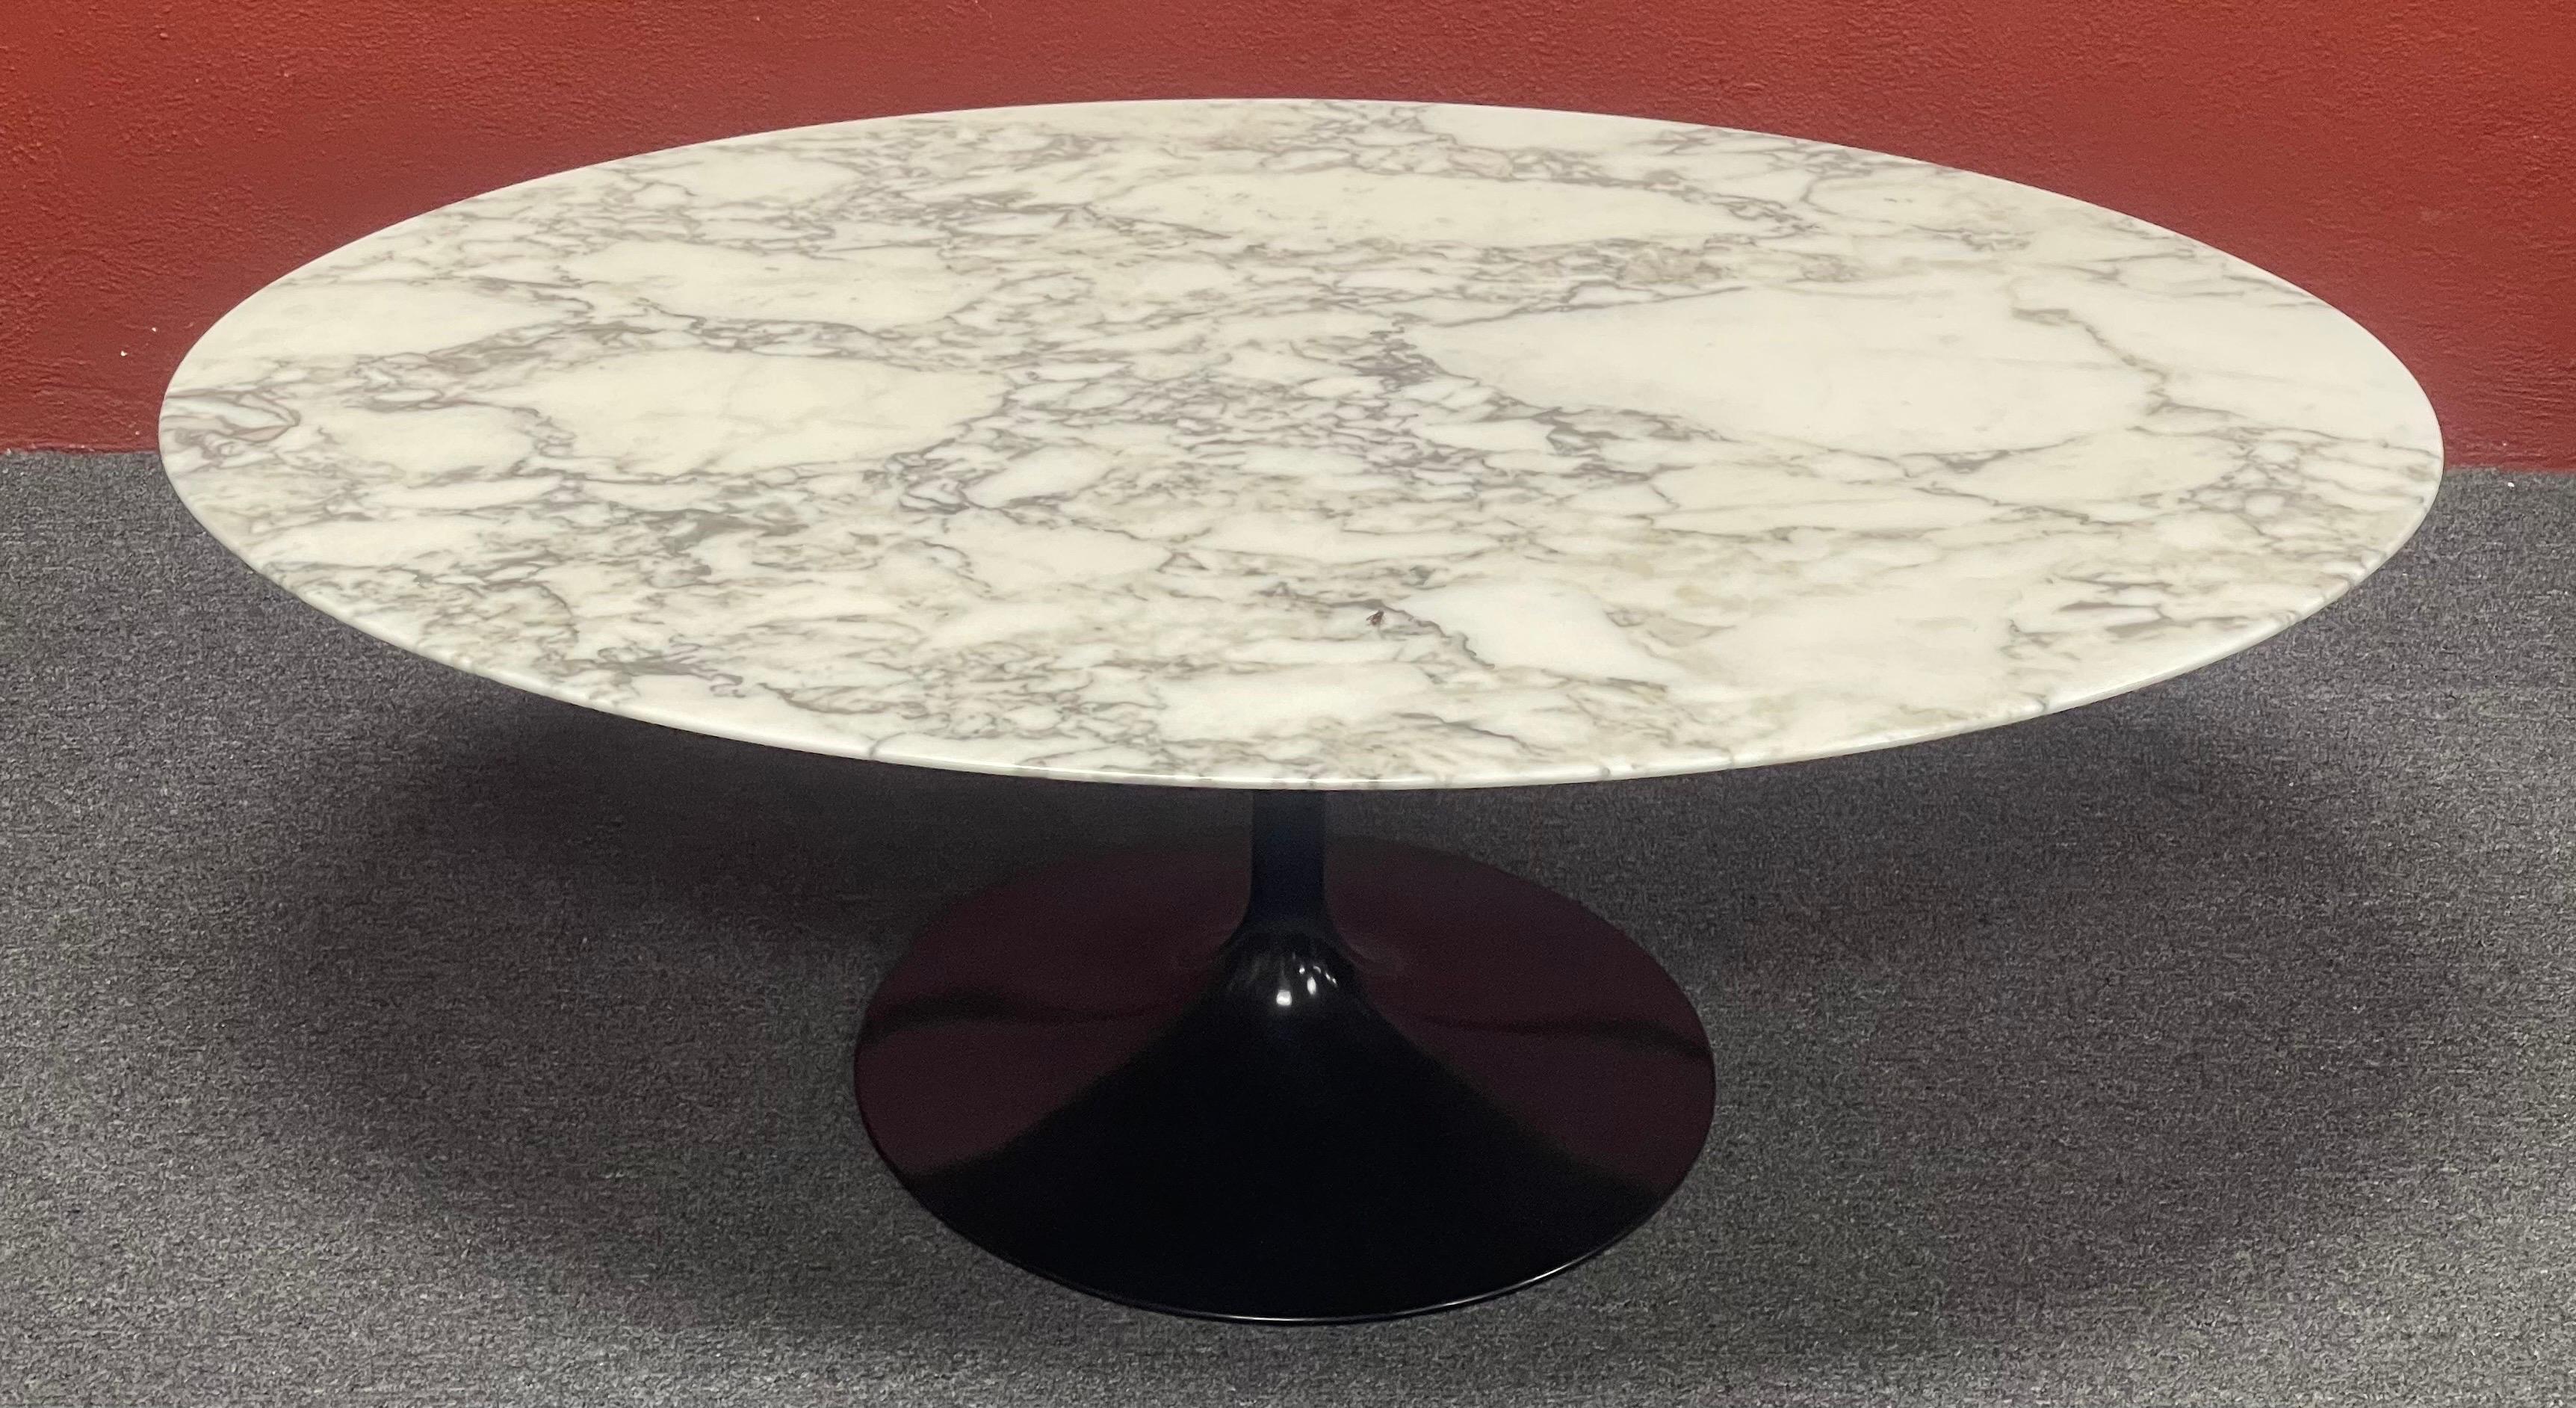 Authentic polished carrara marble top coffee table with black aluminum cast base by Eero Saarinen for Knoll, circa 2015. This timeless modern classic has been in continuous production since 1956. This sturdy table is in very good condition and